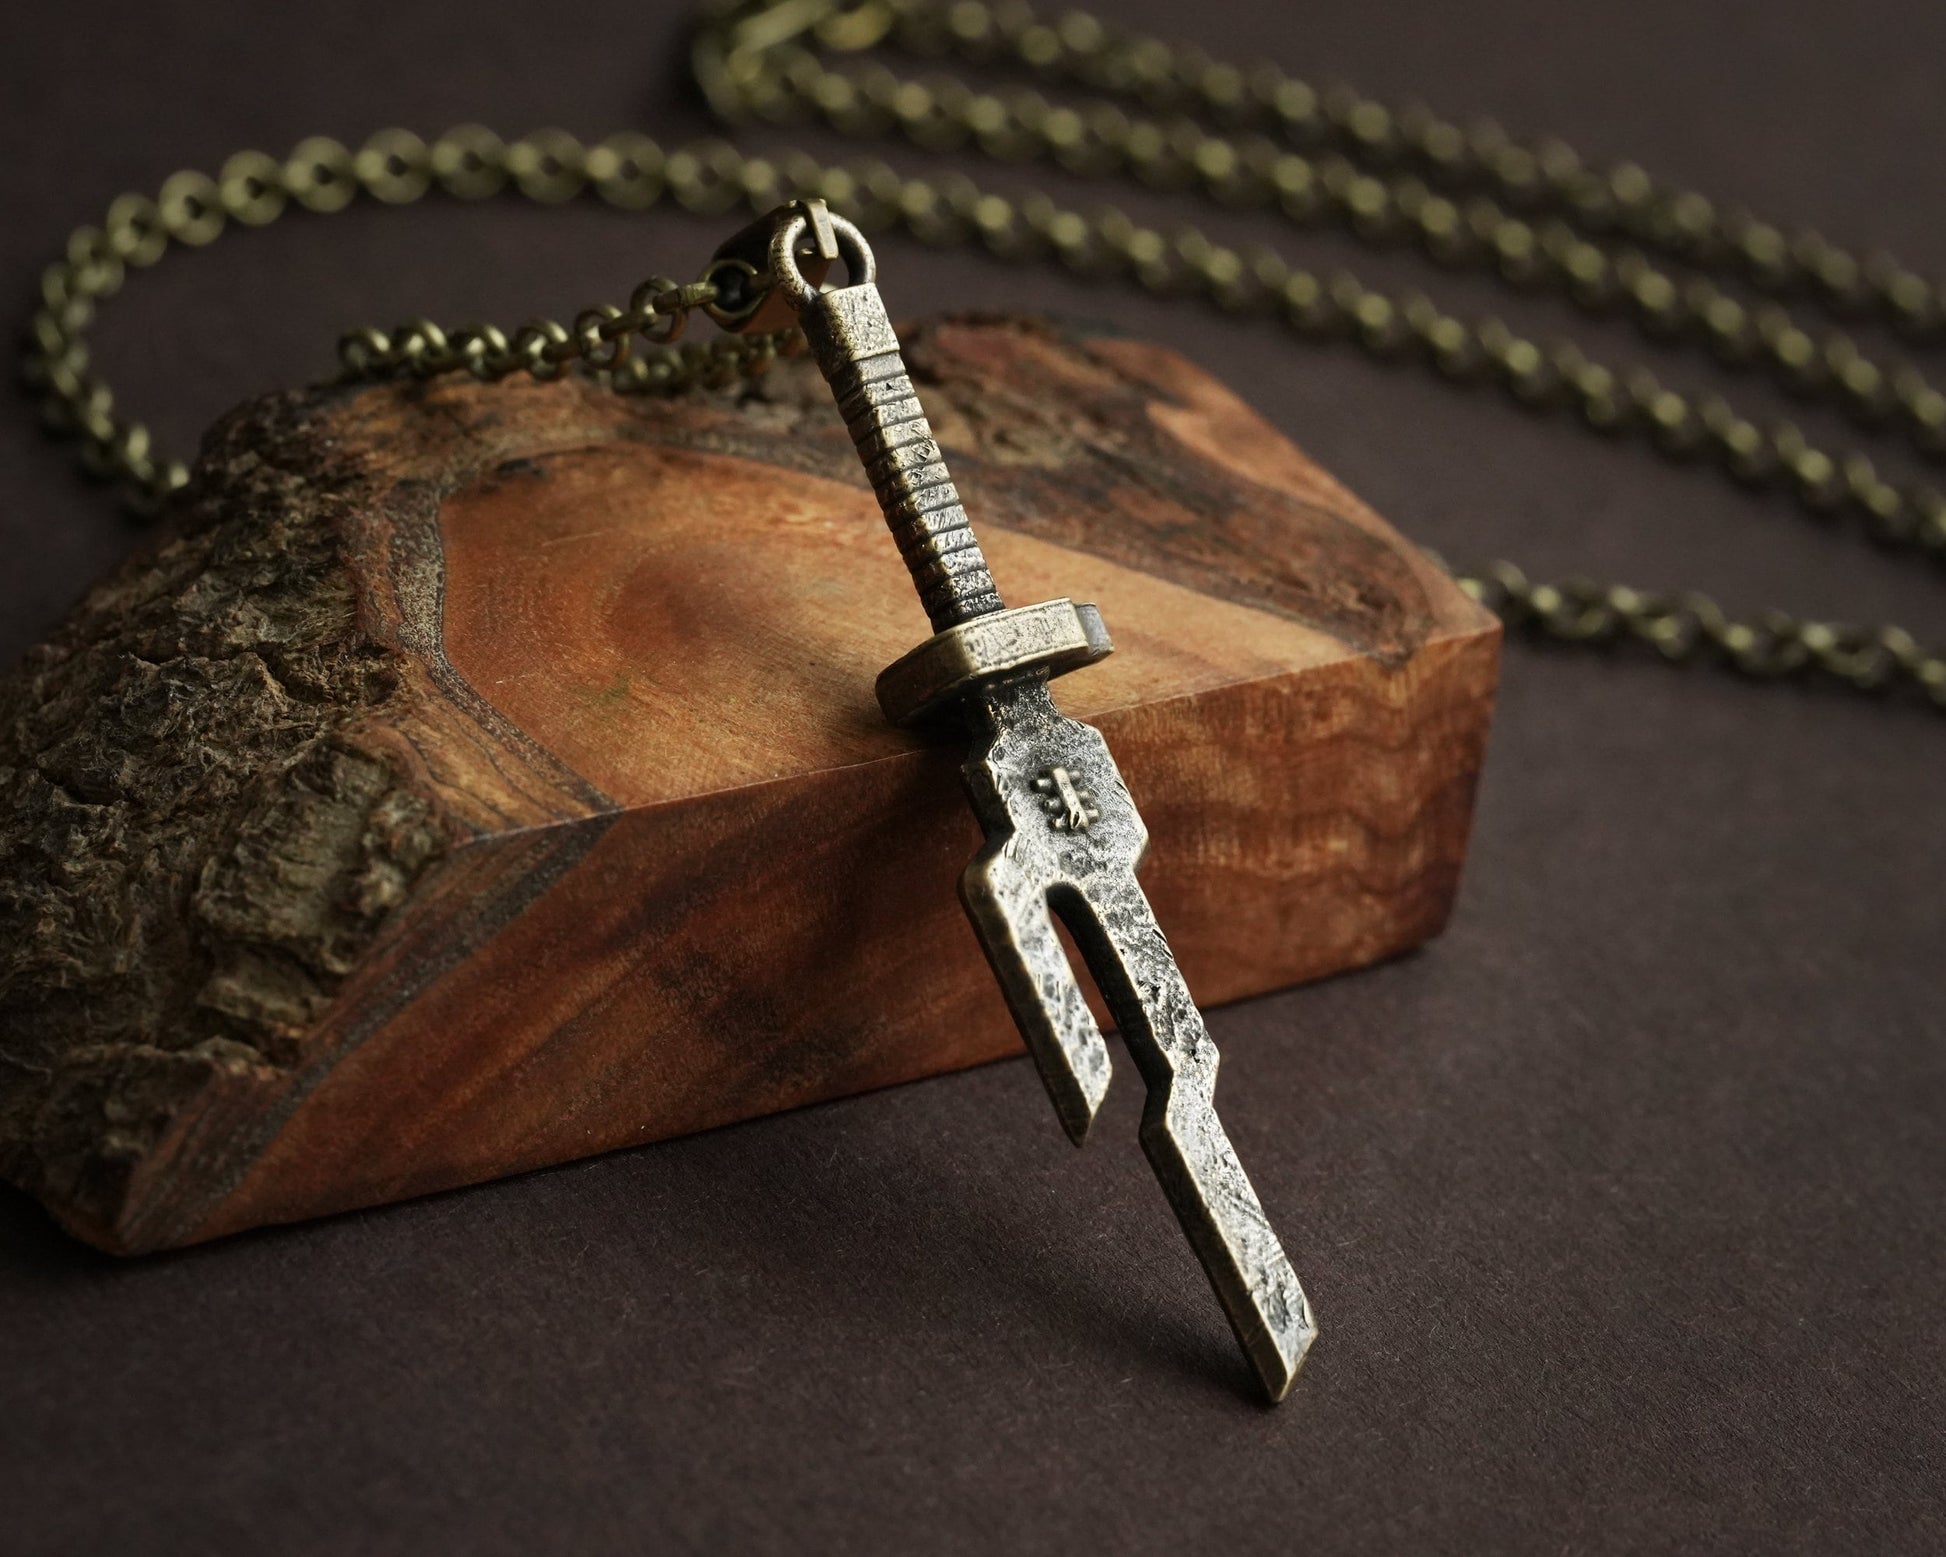 Toji ISoH Spear Necklace Pendant With 22 Inches Chain - Solid Silver or Ancient Bronze Looking Jewelry - Baldur Jewelry